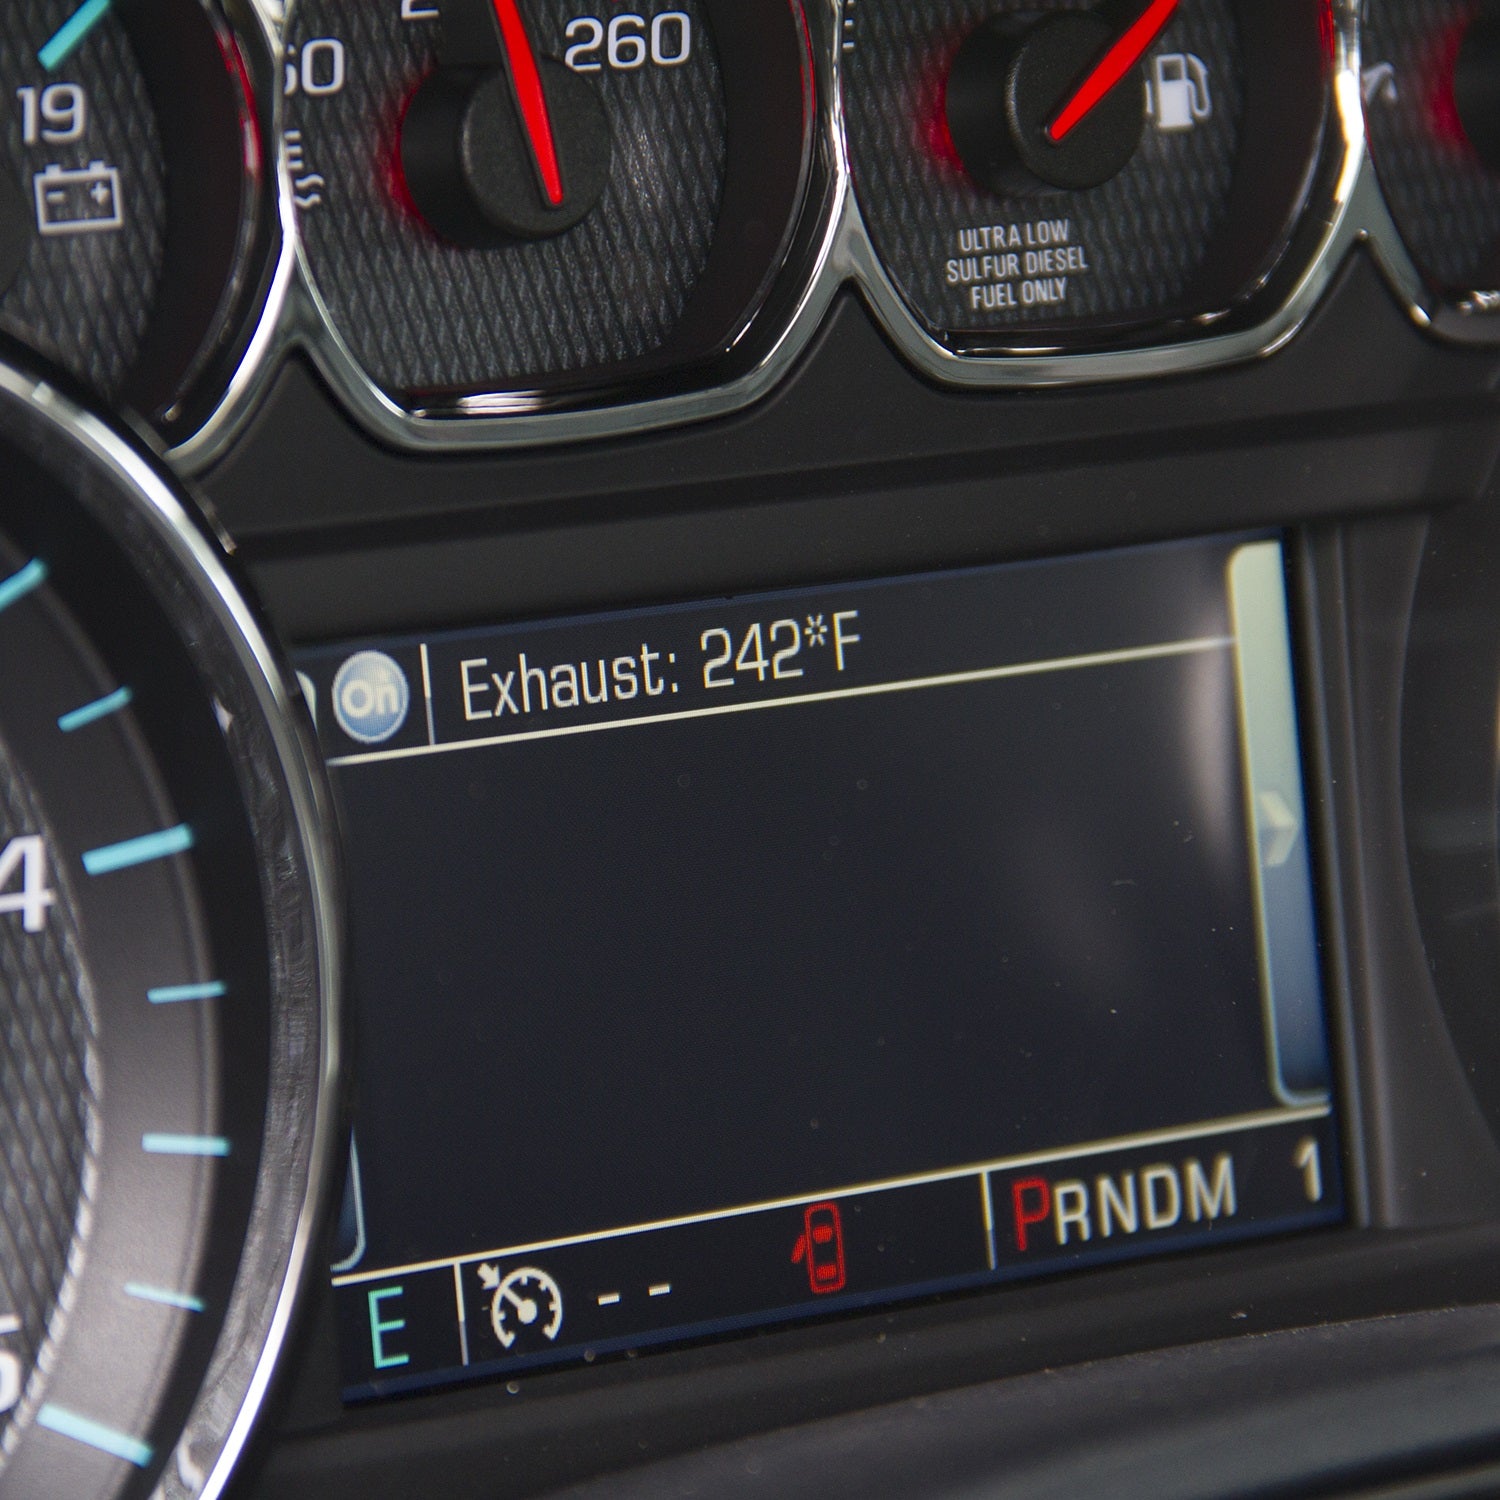 Take control of your vehicle instruments to unlock hidden performance info!